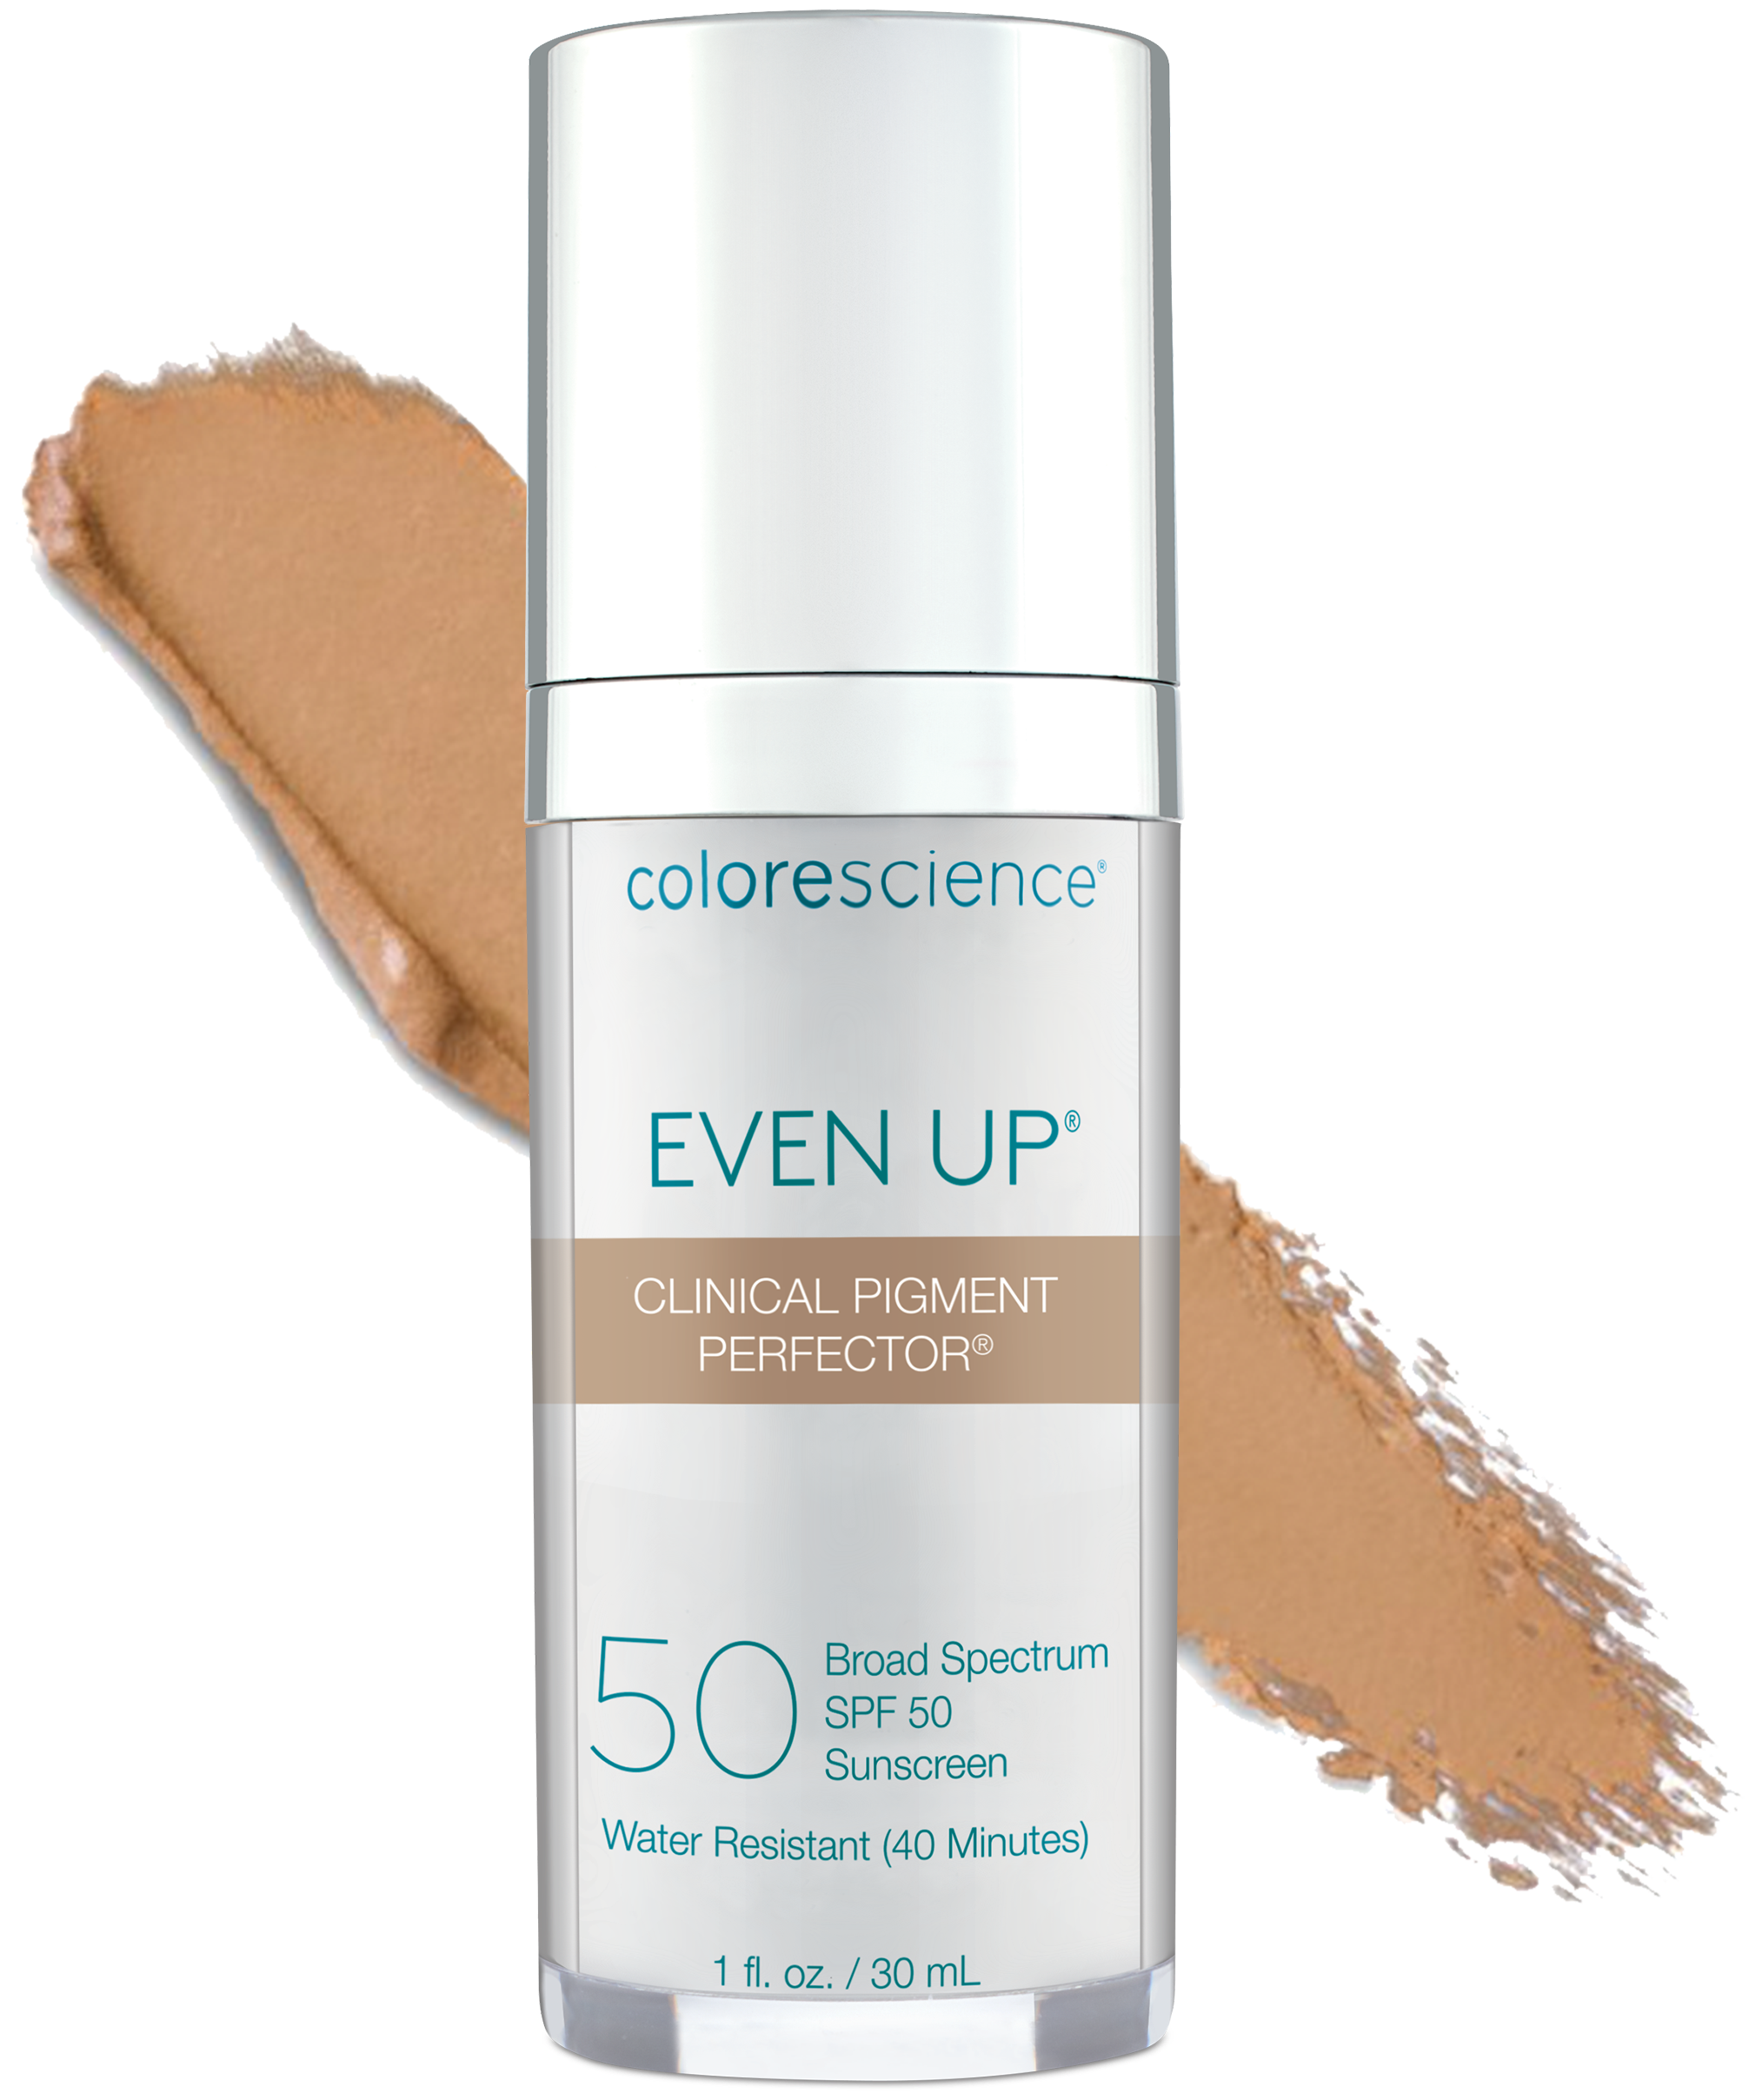 Colorescience 三合一美白修護隔離霜 Even Up Clinical Pigment Perfector SPF50